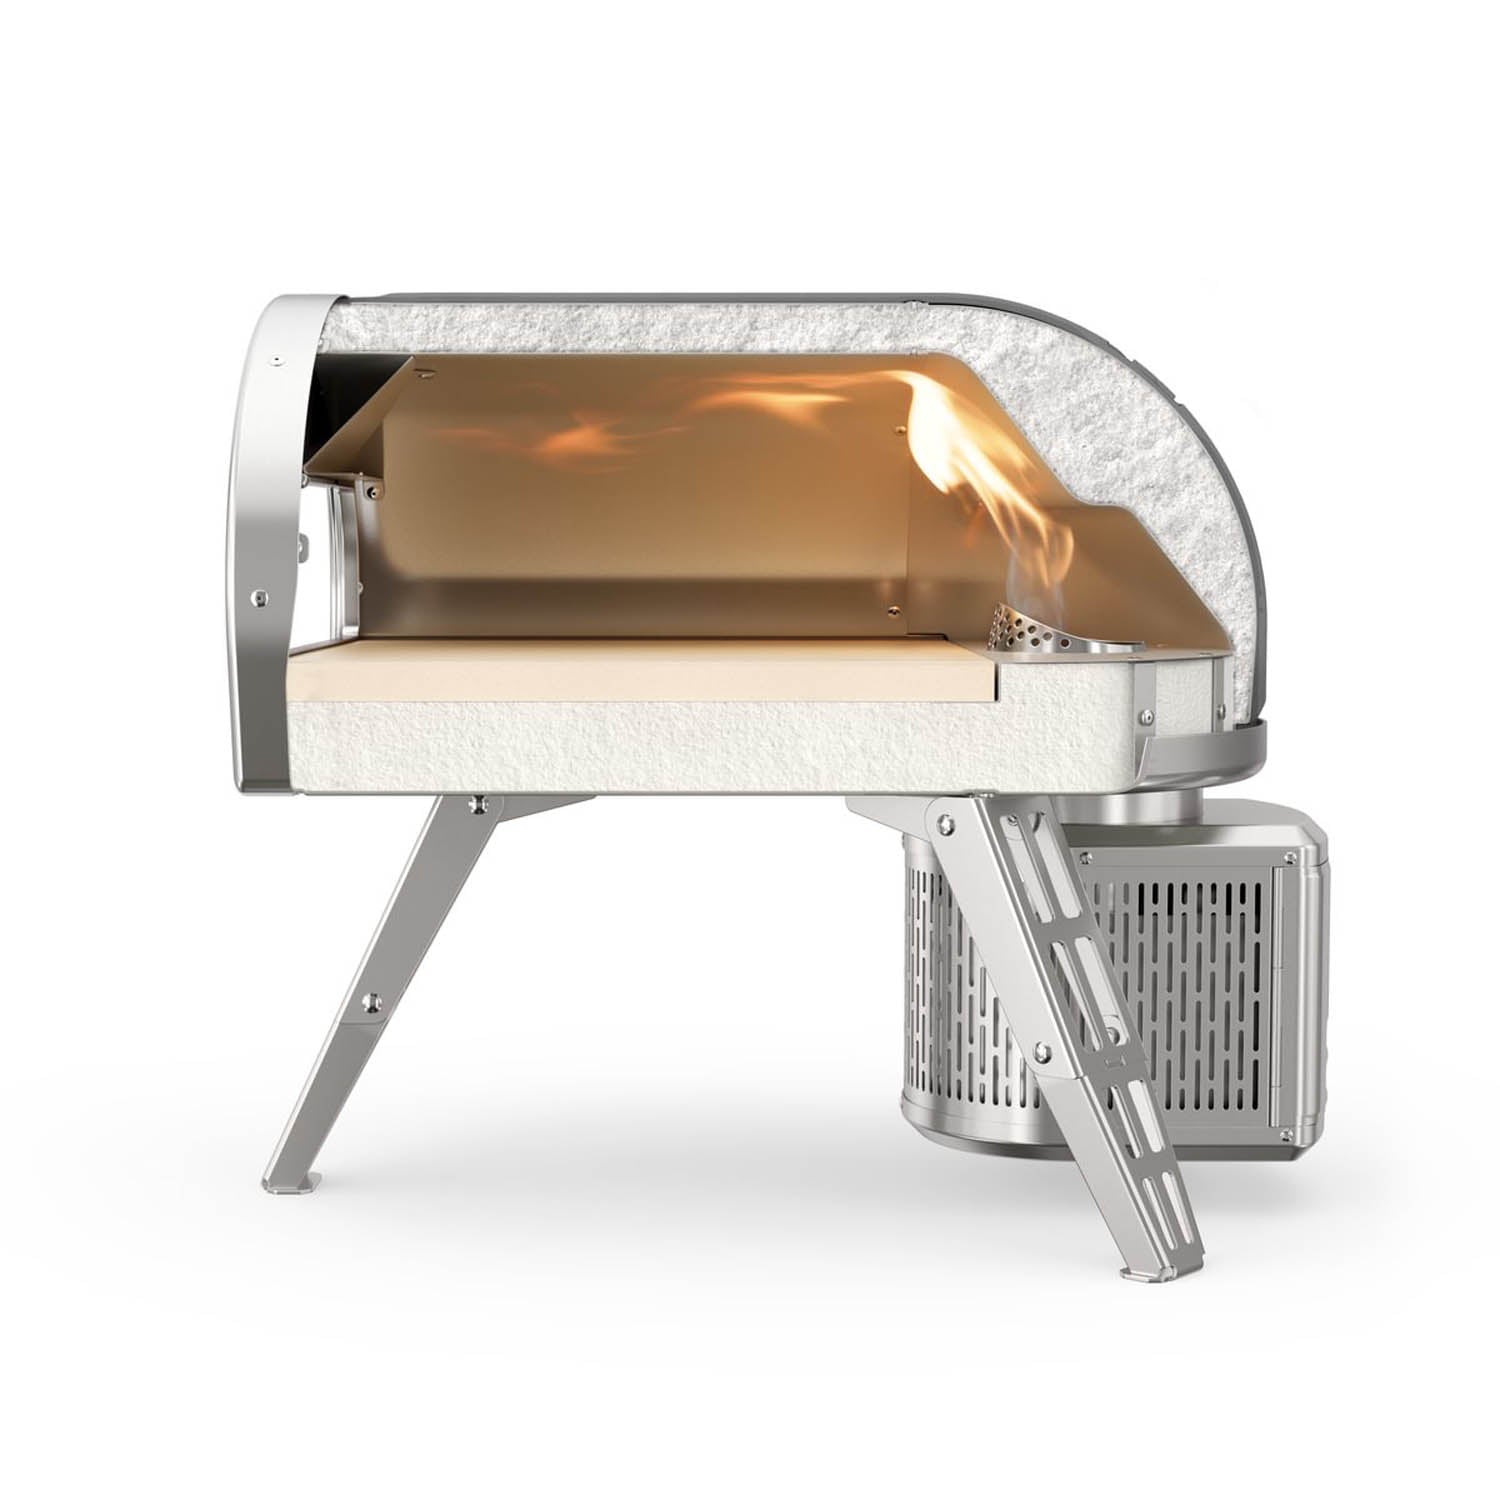 Gozney Roccbox WoodBurner 2.0 Stainless Steel Larger Faster And More Efficient